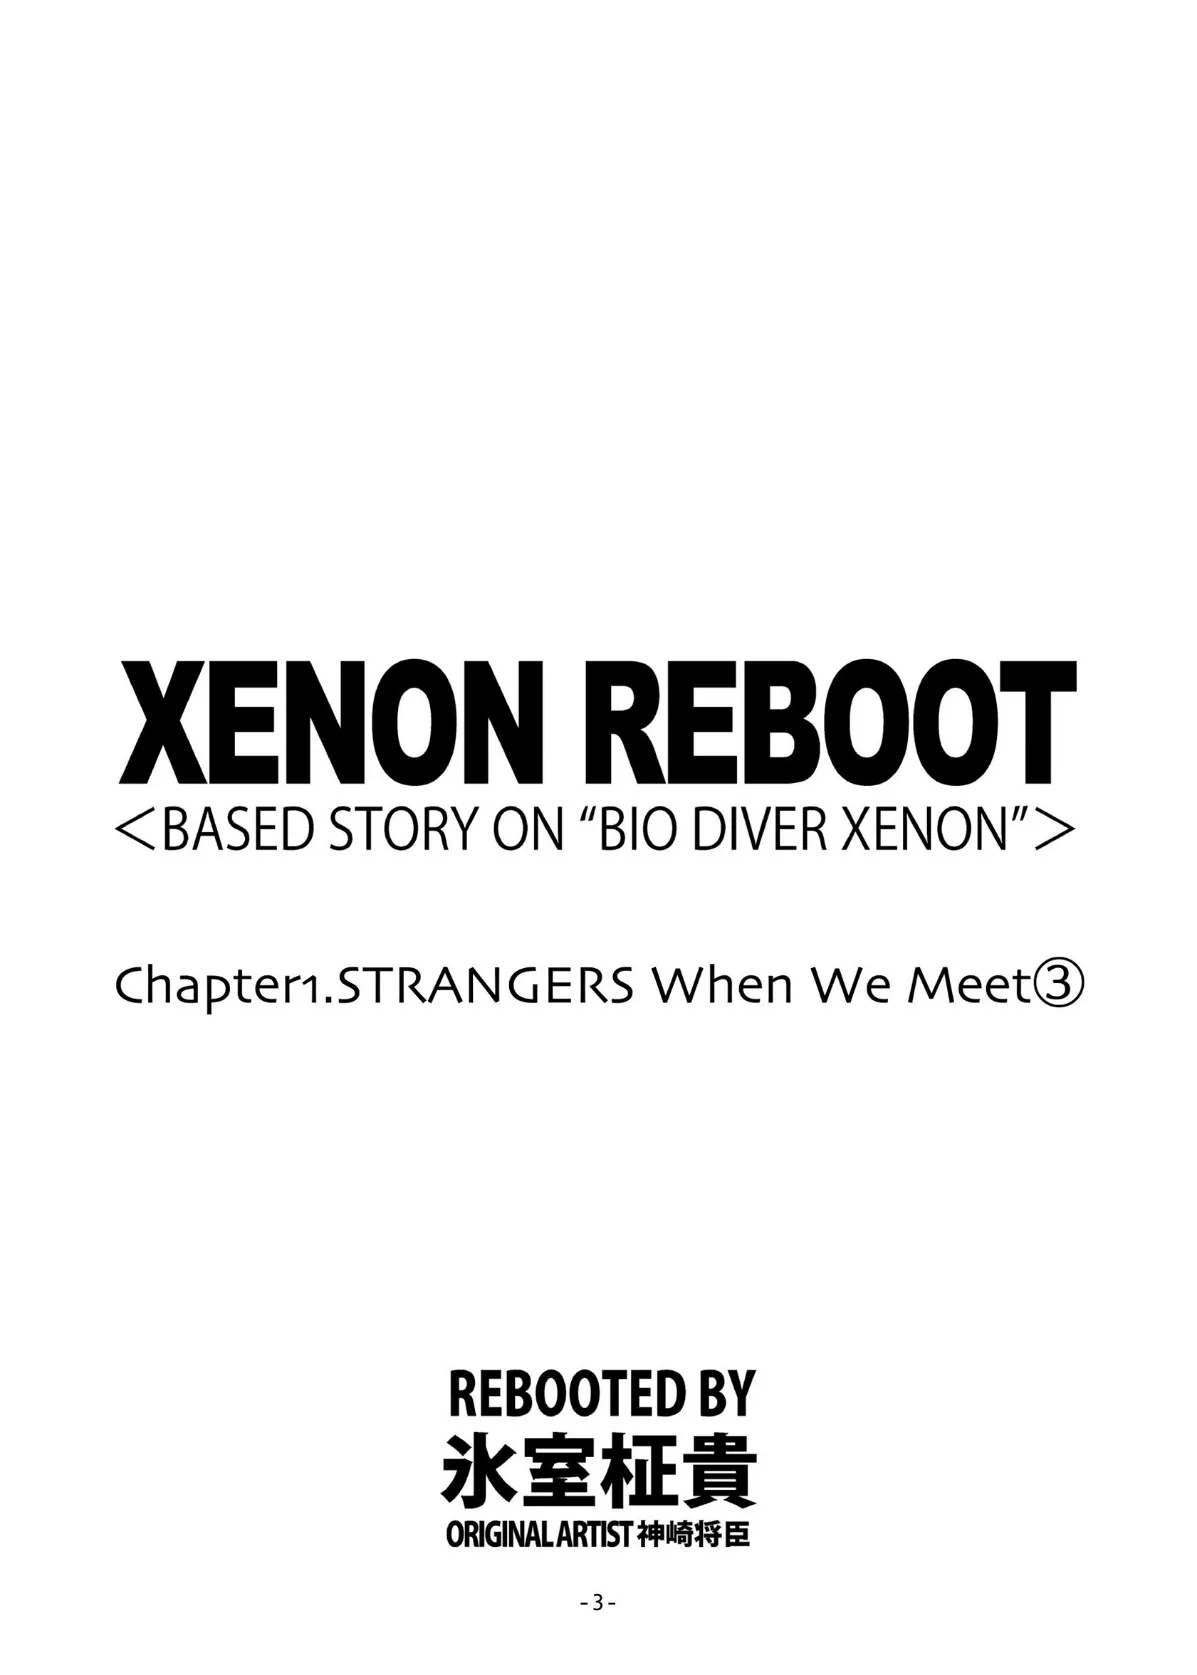 XENON REBOOT＜BASED STORY ON ’BIO DIVER XENON’＞【分冊版】 Chapter1 STRANGERS When We Meet（3） 3ページ